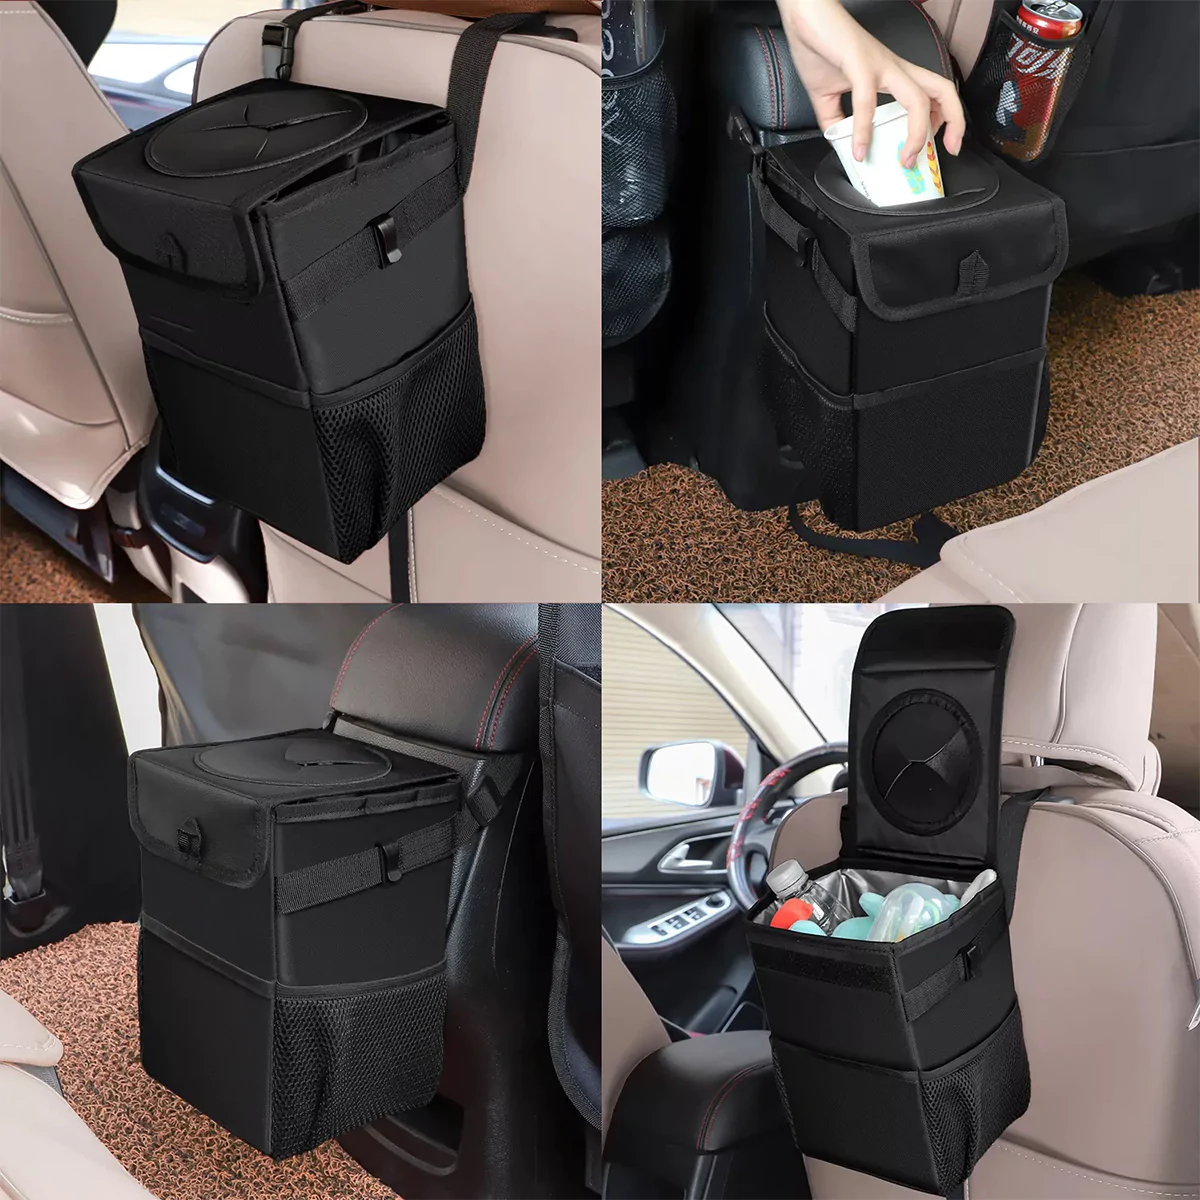 Waterproof Car Trash Can with Lid and Storage Pockets, Custom-Fit For Car, 100% Leak-Proof Car Organizer, Waterproof Car Garbage Can, Multipurpose Trash Bin for Car DLTY234